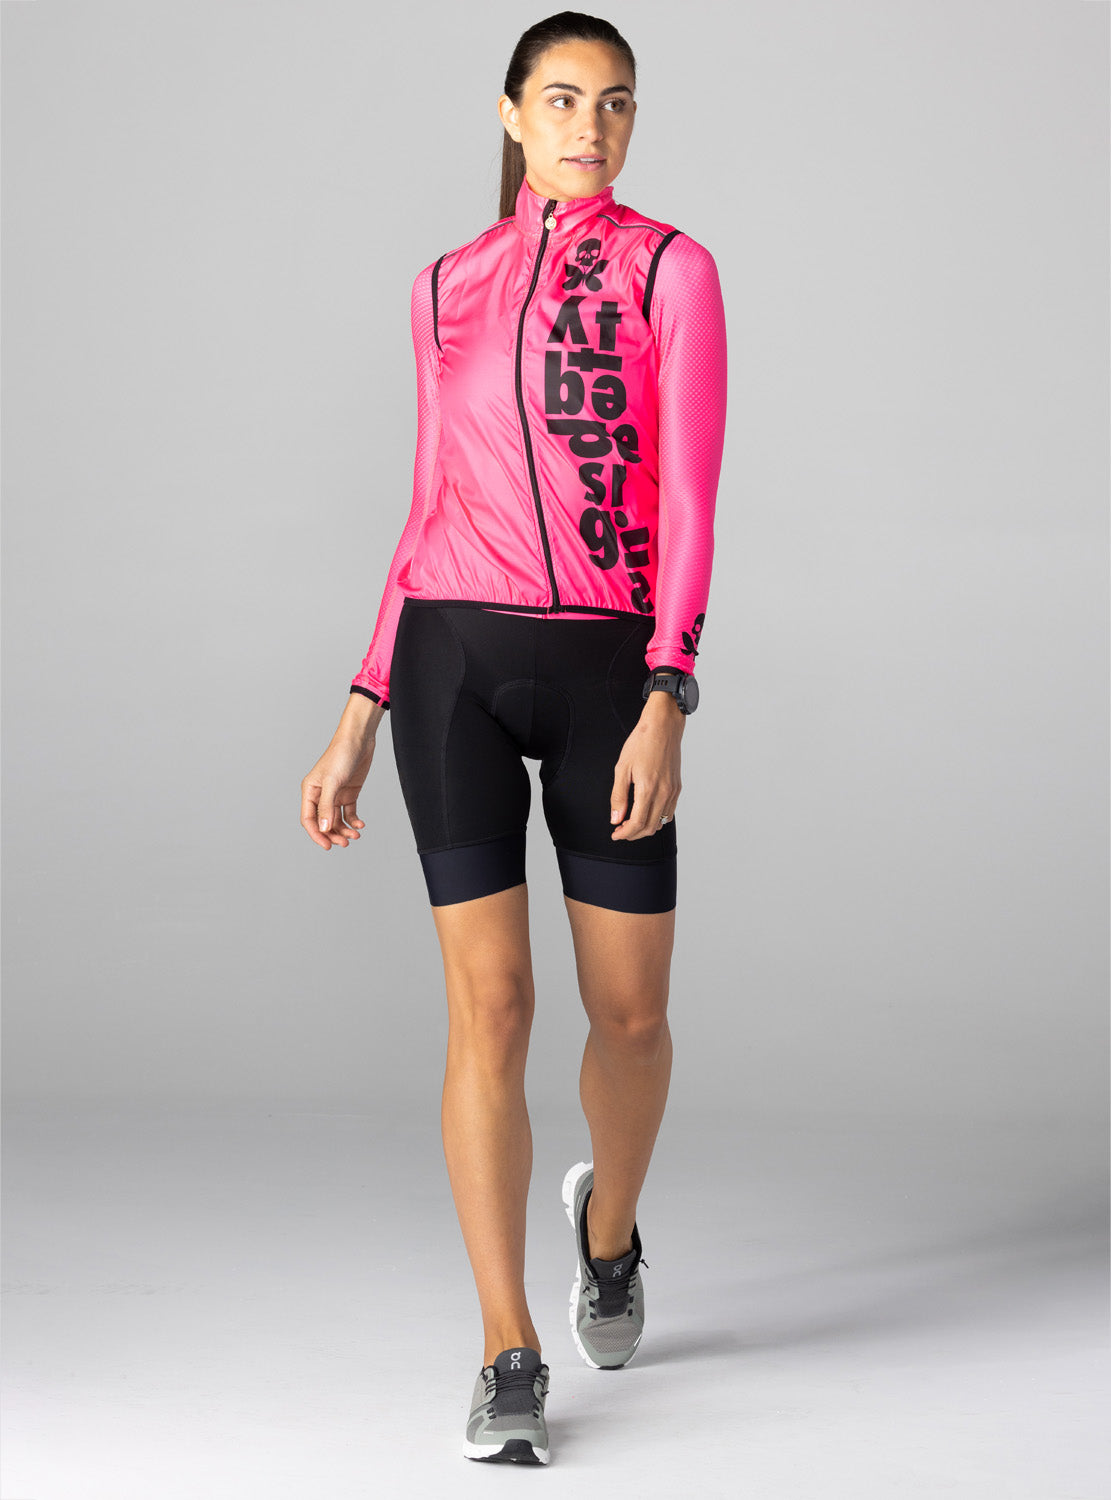 betty designs elements pink cycling running  vest